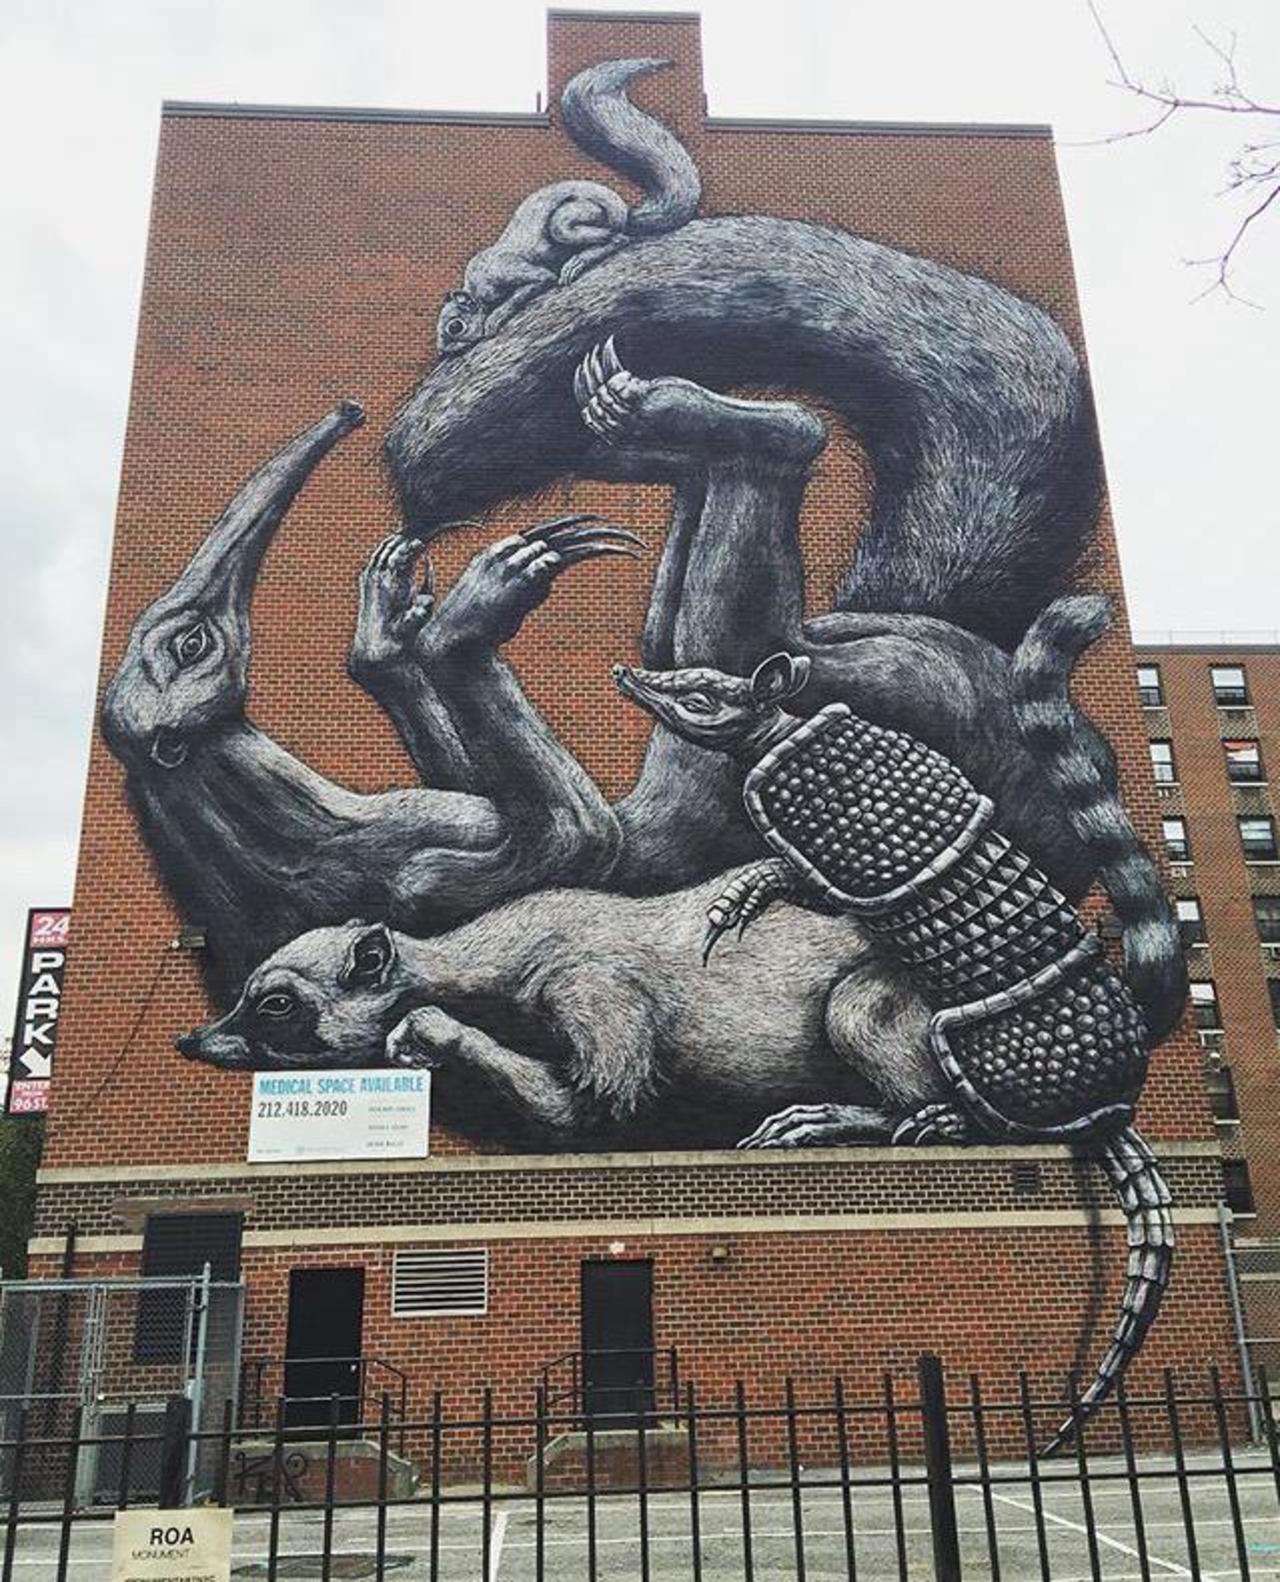 The completed new large scale Street Art wall by ROA in NYC

#art #graffiti #mural #streetart http://t.co/yrRltpVnYo